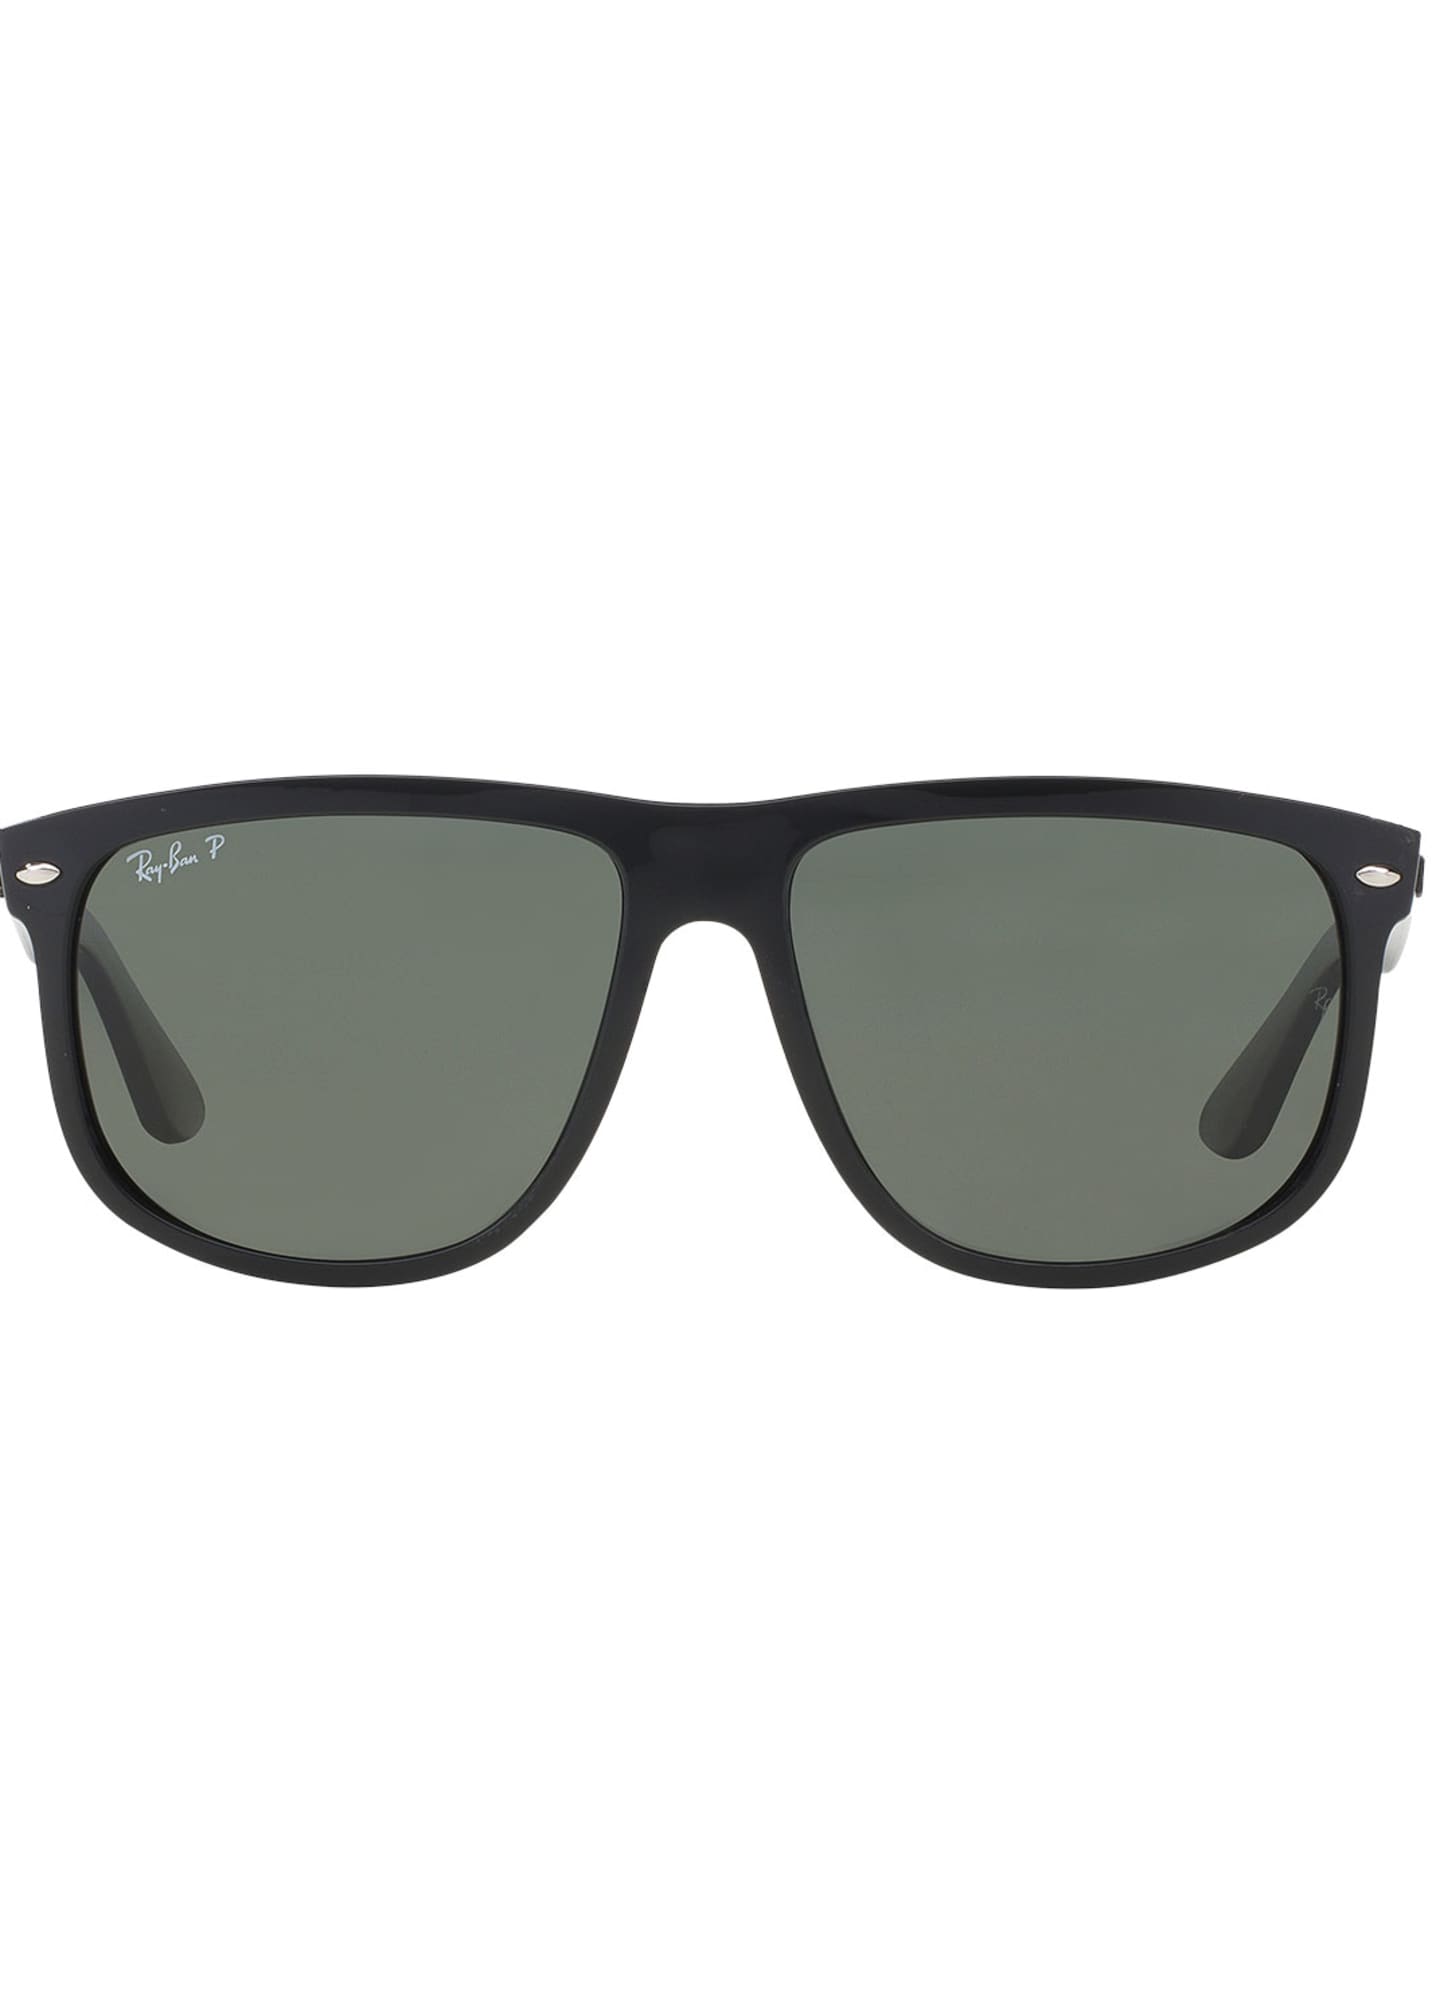 Ray-Ban RB4147 Rounded Square Universal Fit Sunglasses - Bergdorf Goodman